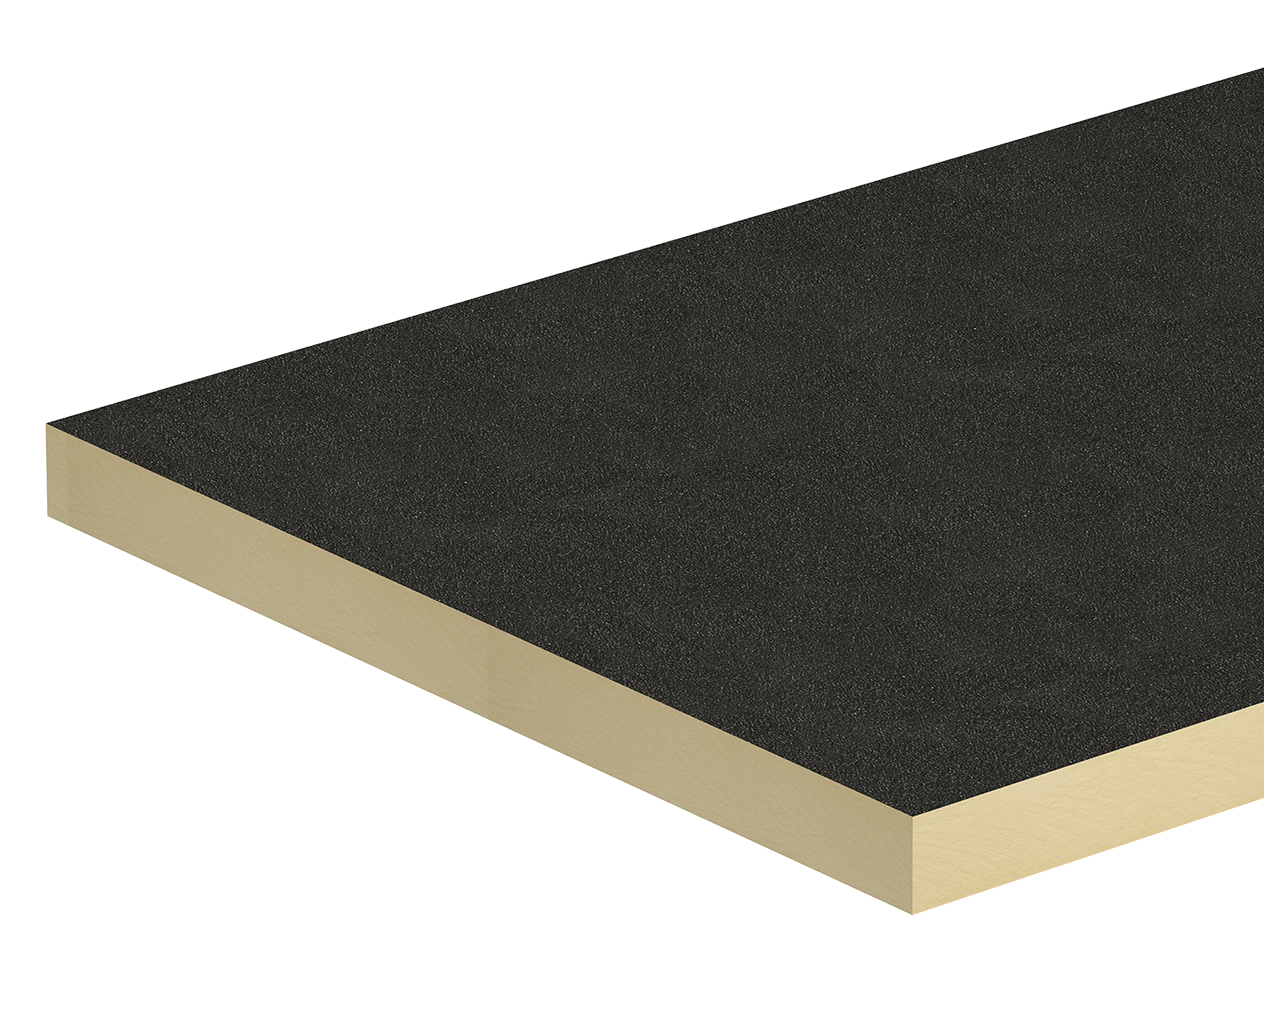 Kingspan Thermaroof TR24 Flat Roof Insulation - 1200mm x 600mm x 50mm (pack of 6 sheets 4.32m2)